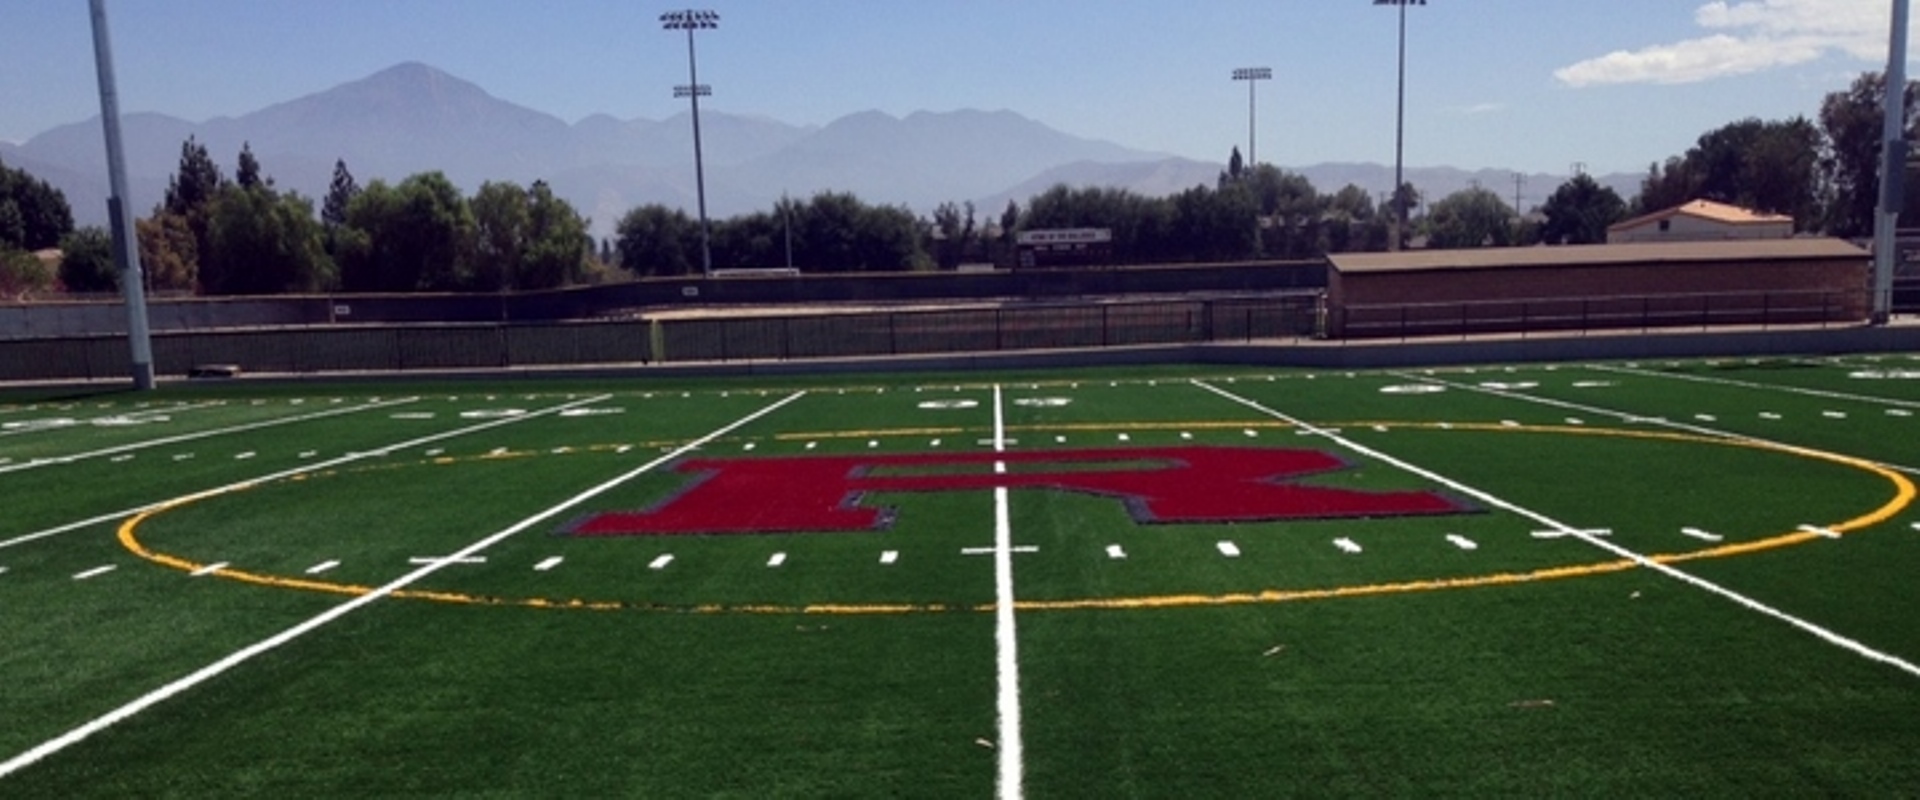 The University of Redlands have chosen FieldTurf for their football